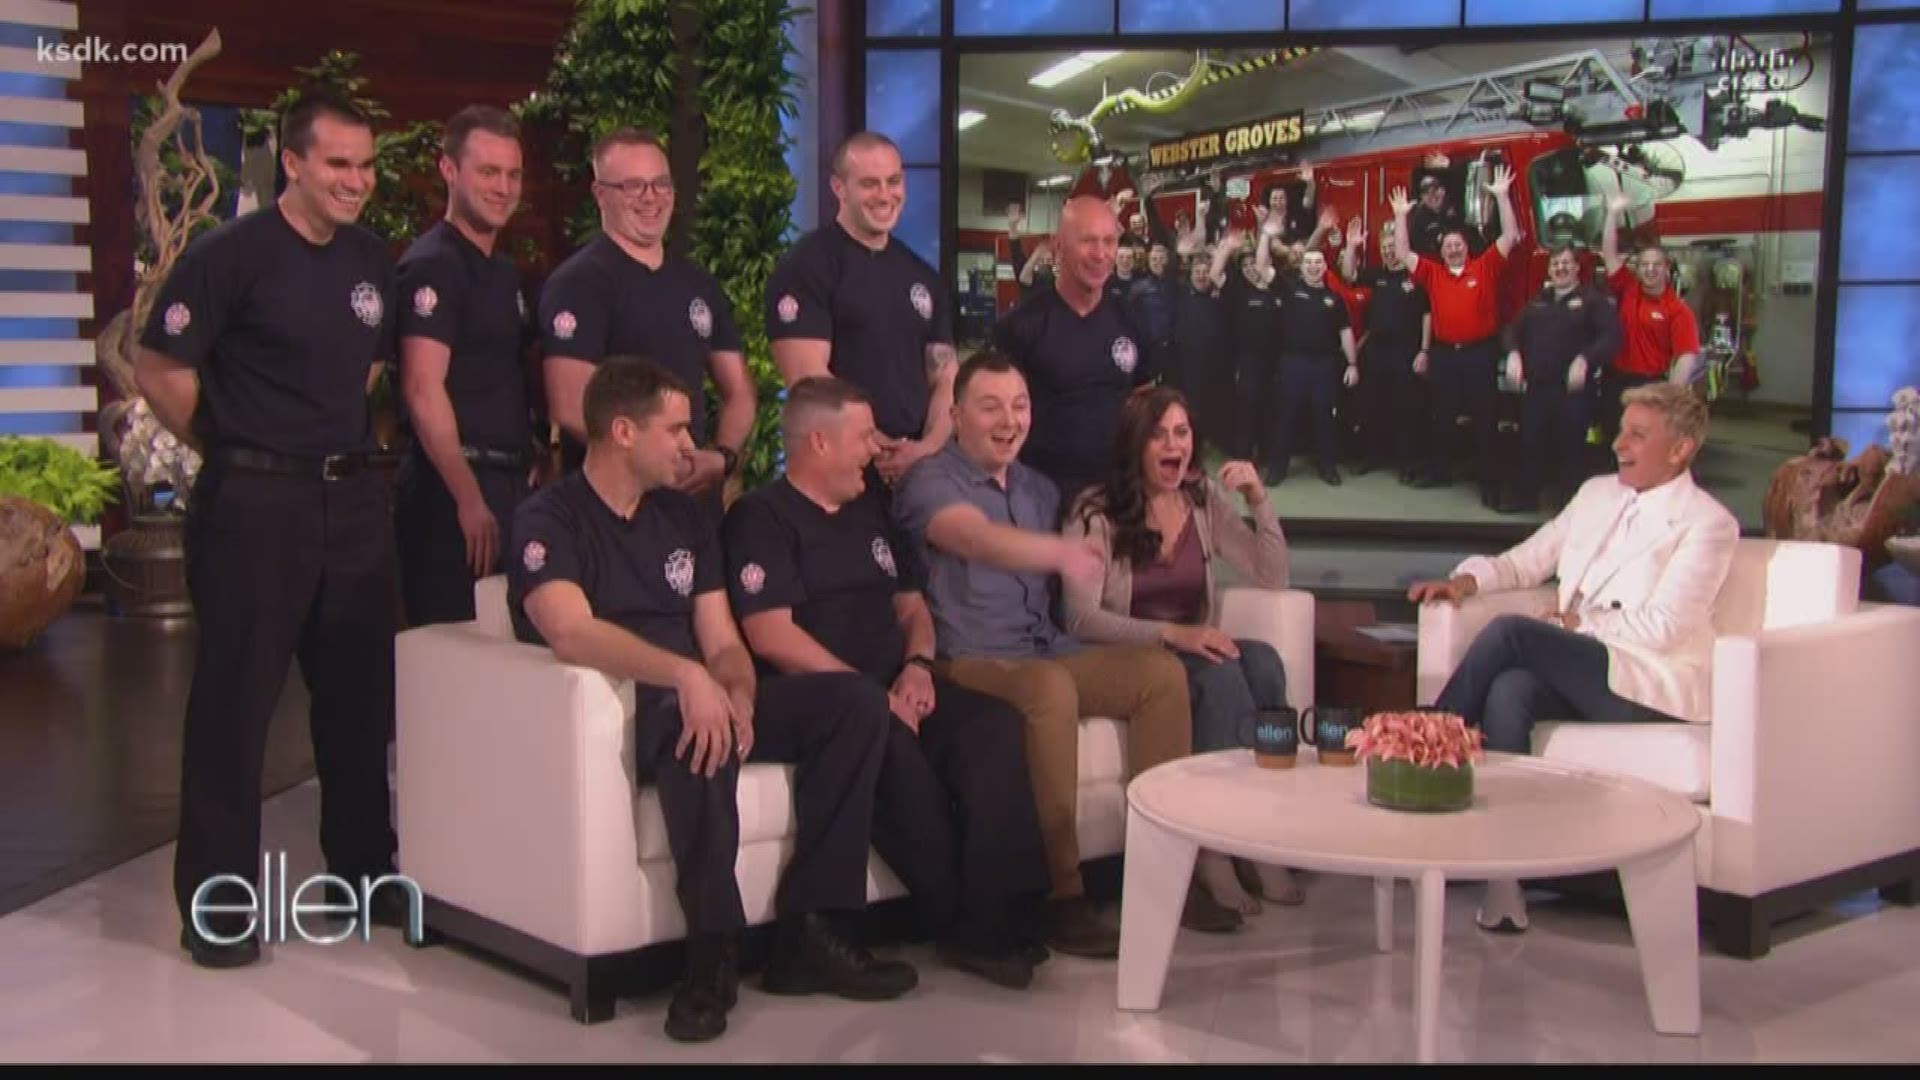 Ellen gave the couple and the Webster Groves Fire Department $25,000 each.